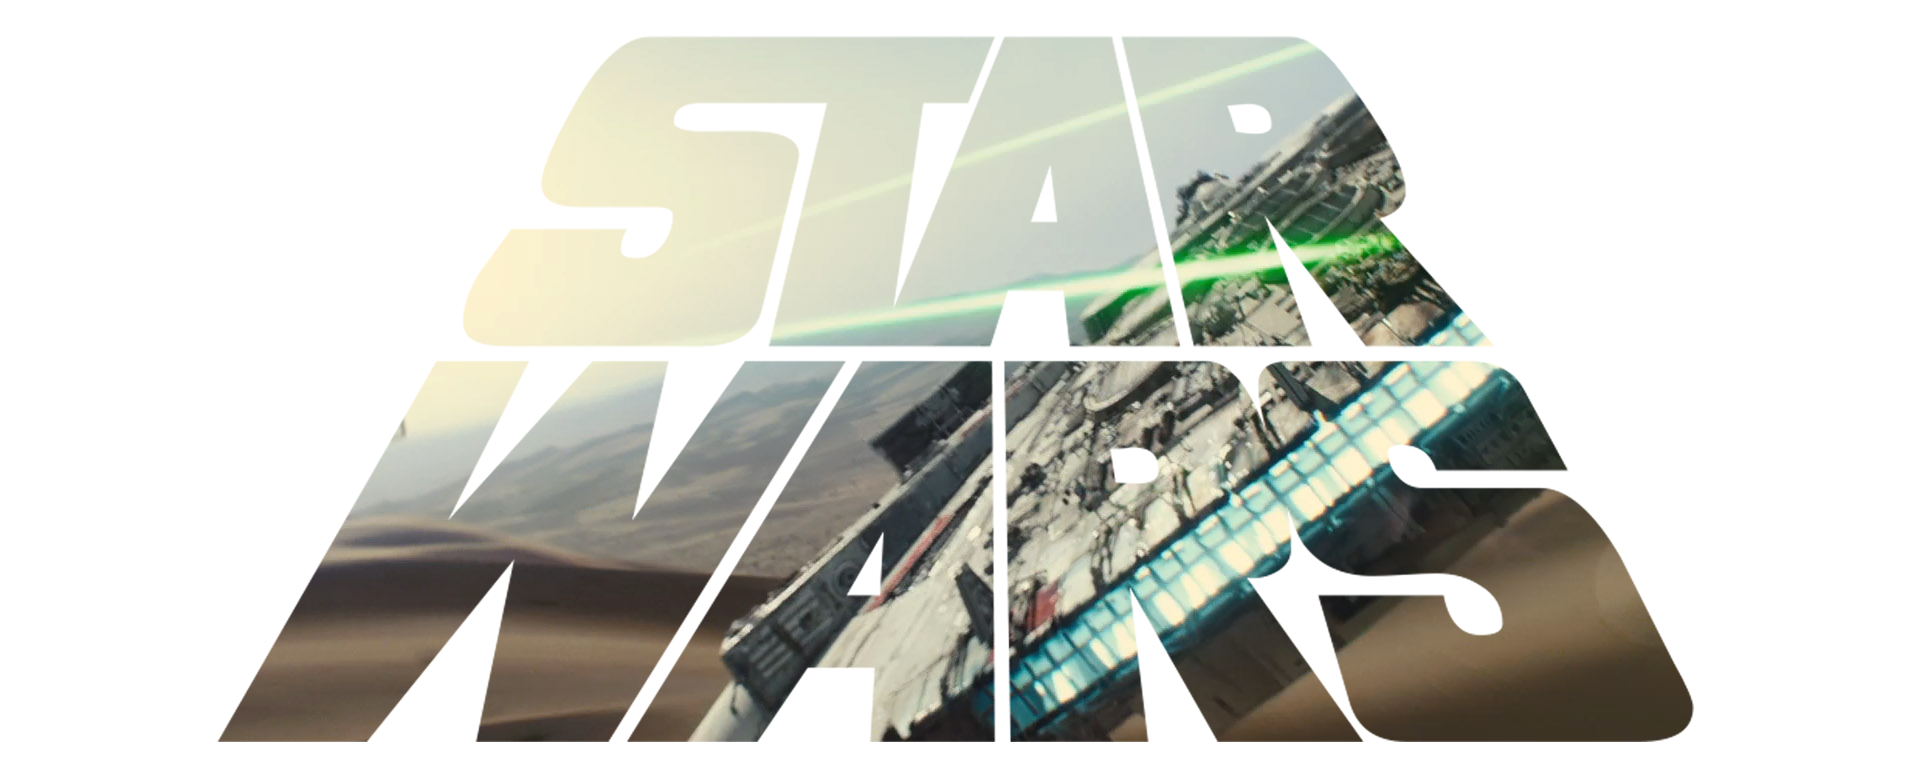 Star Wars the Force Awakens Wallpaper by MessyPandas on